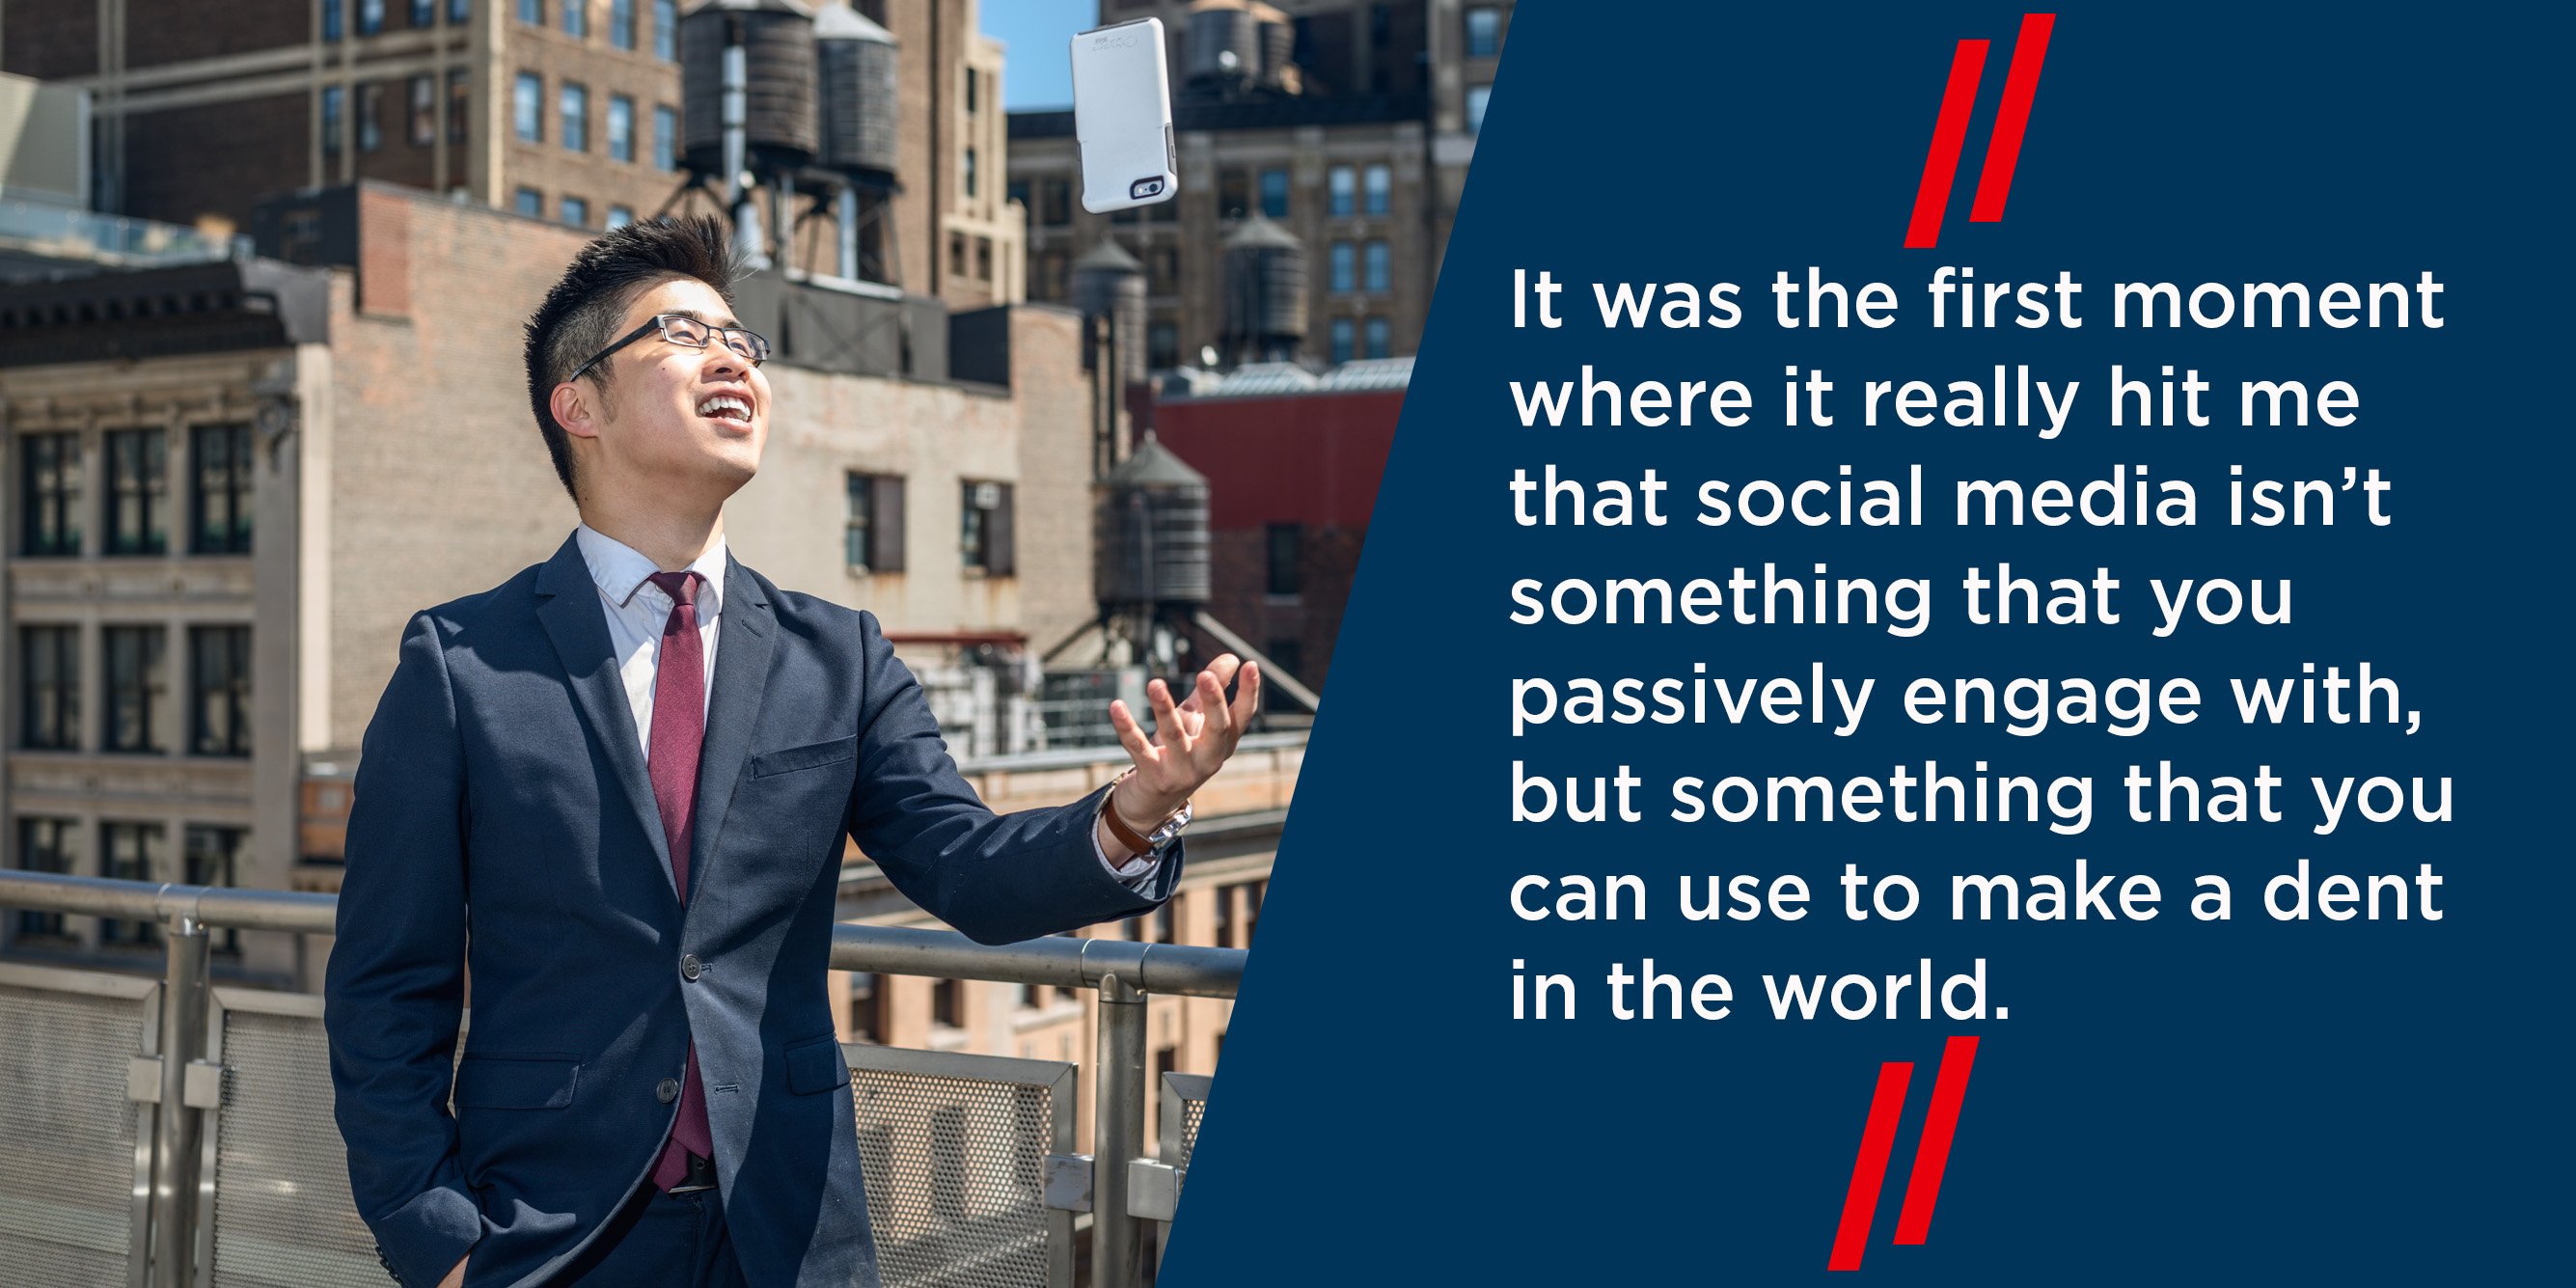 "It was the first moment where it really hit me that social media isn’t something that you passively engage with, but something that you can use to make a dent in the world.:"